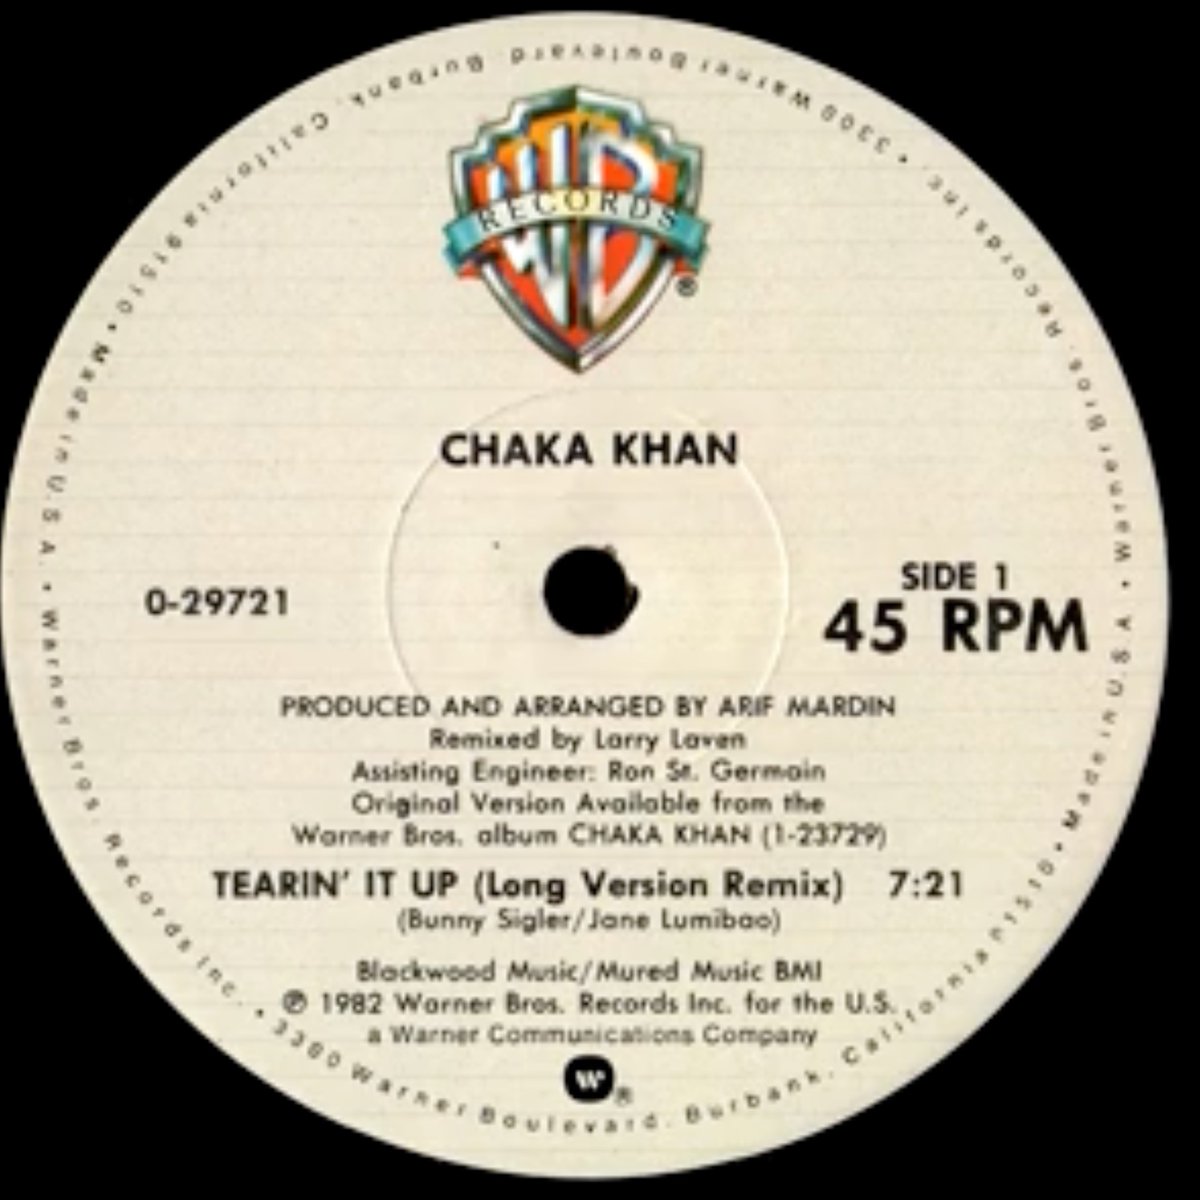 @oldsoulgavin 'I'm gonna make you wish there were two of you...'
Chaka Khan🙌🏾🎙️🔥Tearin' It Up (1982)
▶️Long Version Remix by *Larry Levan🎯🎚️❤️#ParadiseGarage
🎧youtu.be/xMdcFNvek90?si…